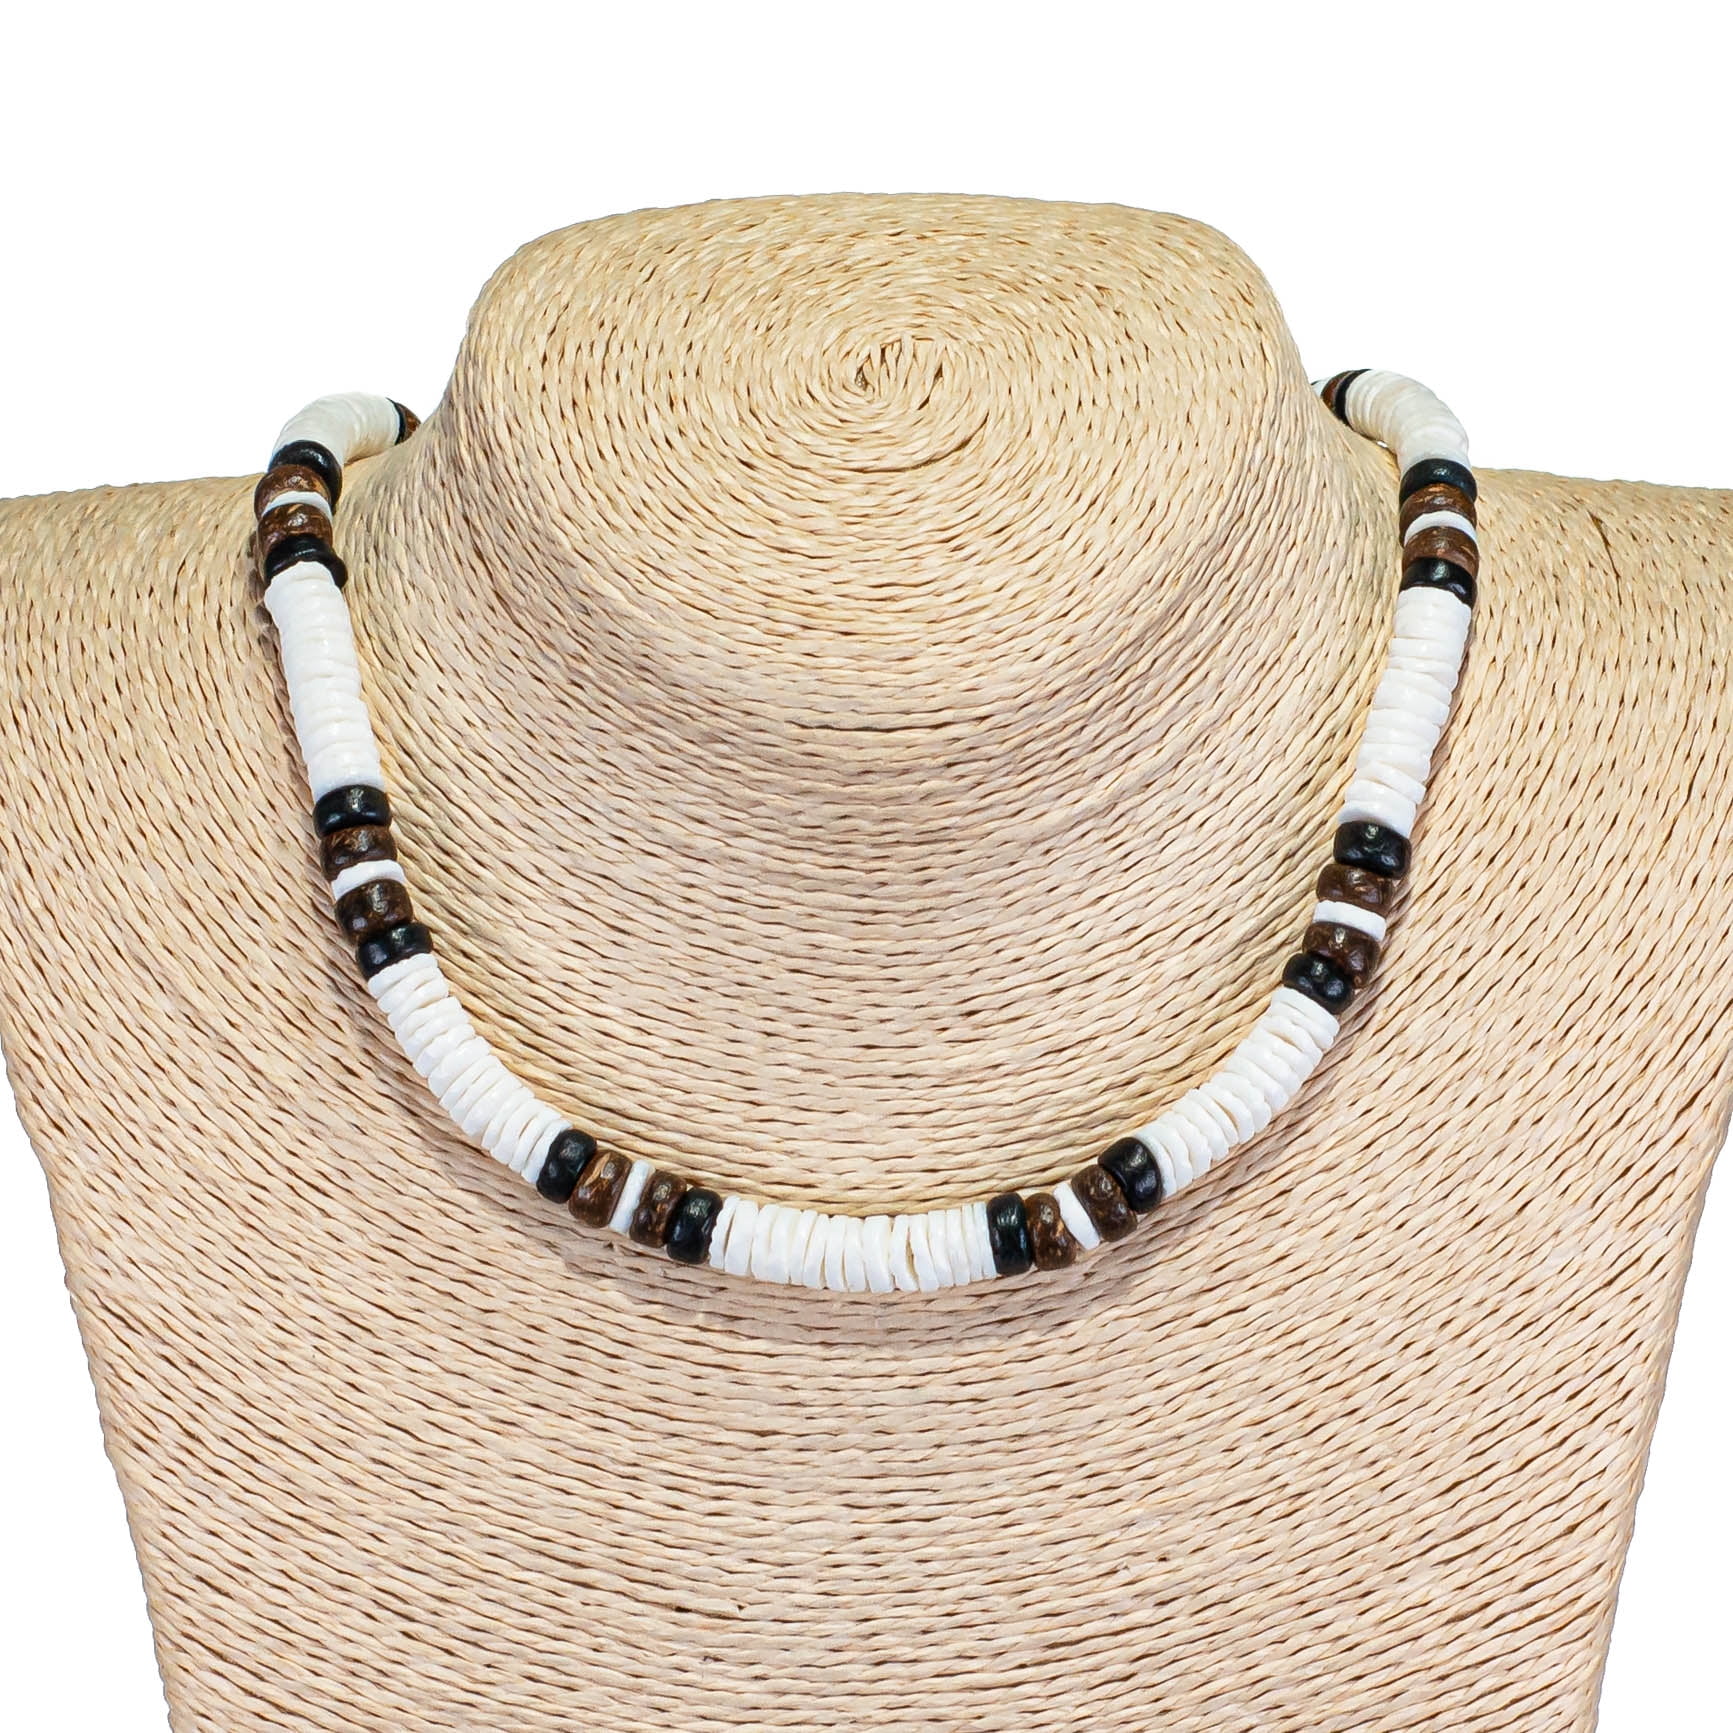 Wood Cross Pendant on Brown Coconut and Puka Shell Beads Necklace